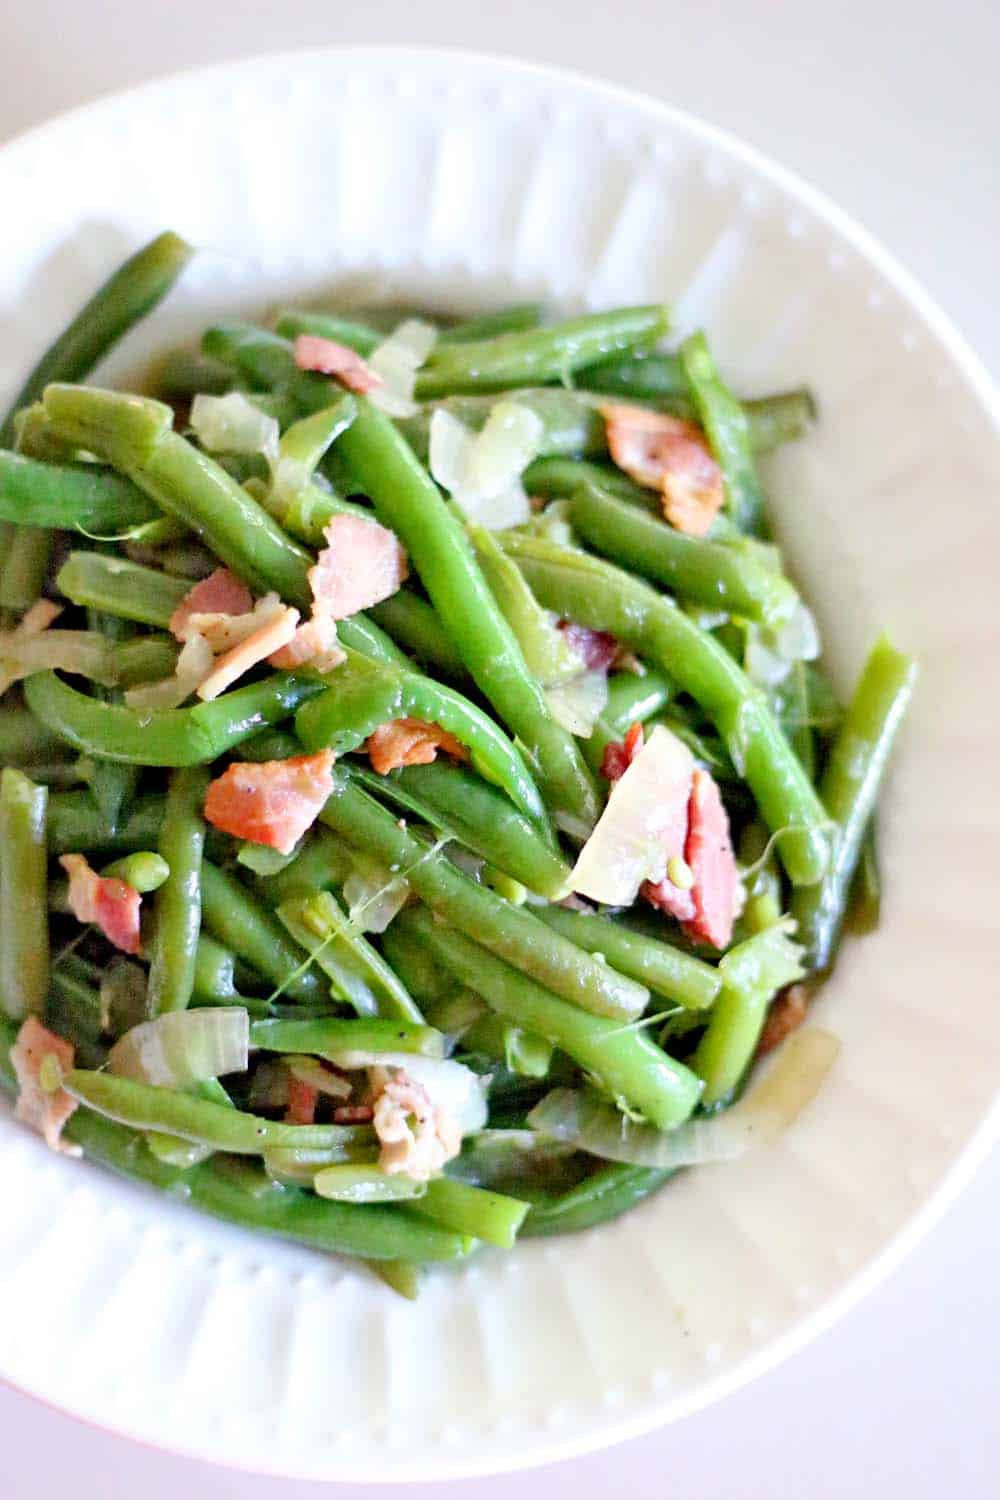 These Southern Style Green Beans are easy and melt-in-your mouth delicious- they're smoky from the bacon and super savory from simmering to perfection in chicken broth! YUM.